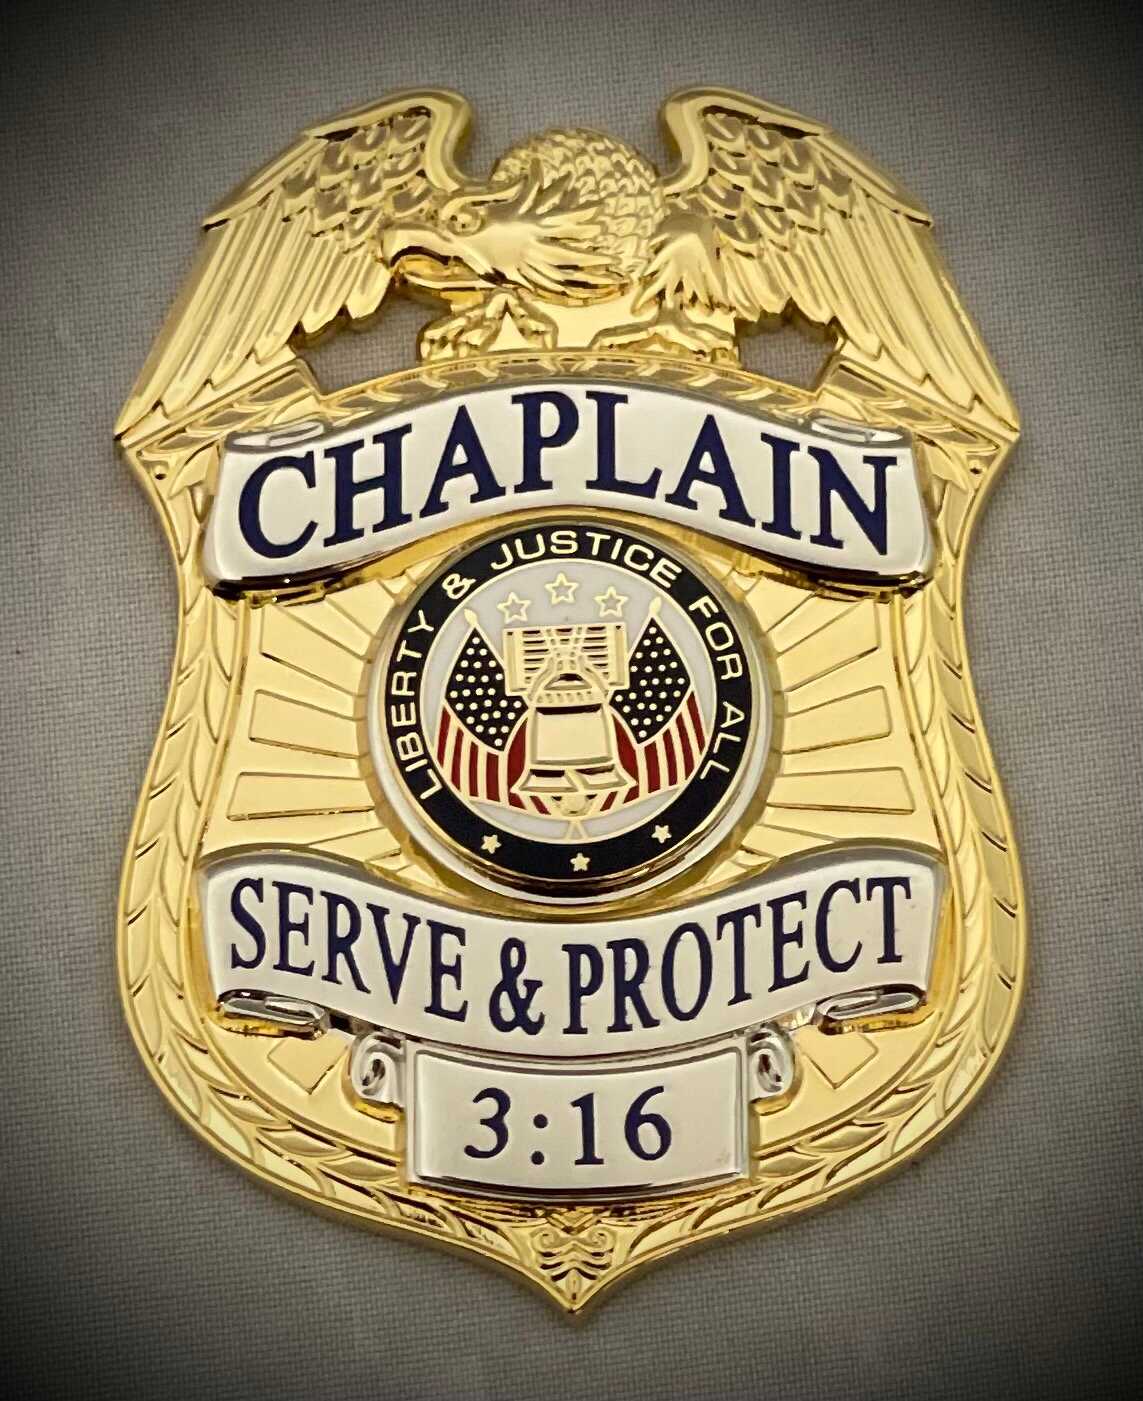 Chaplain Serve and Protect Gold Two-Tone Badge with Black leather belt clip holder